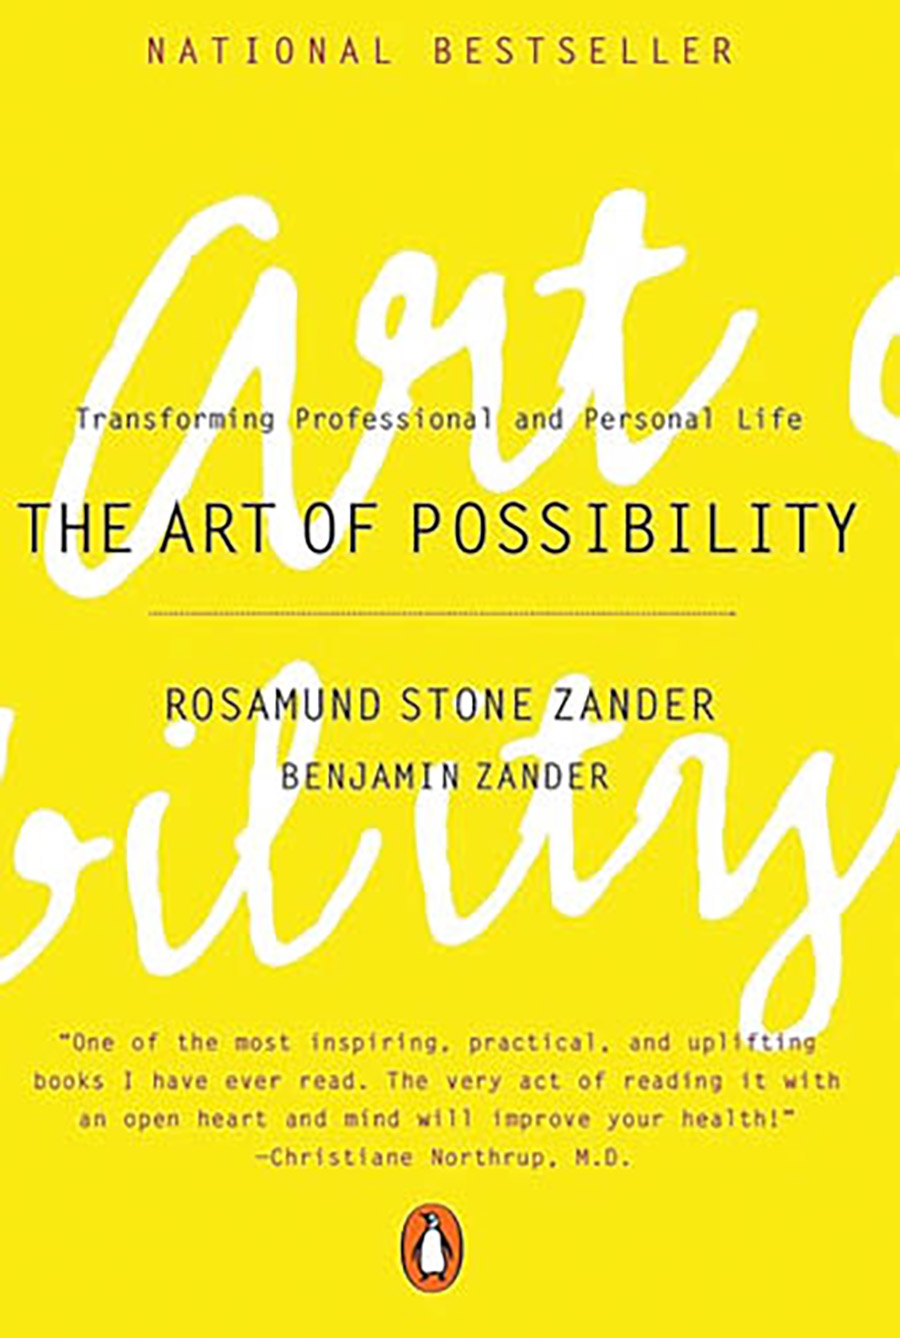 The cover of The Art of Possibility is bright yellow with black and white text.